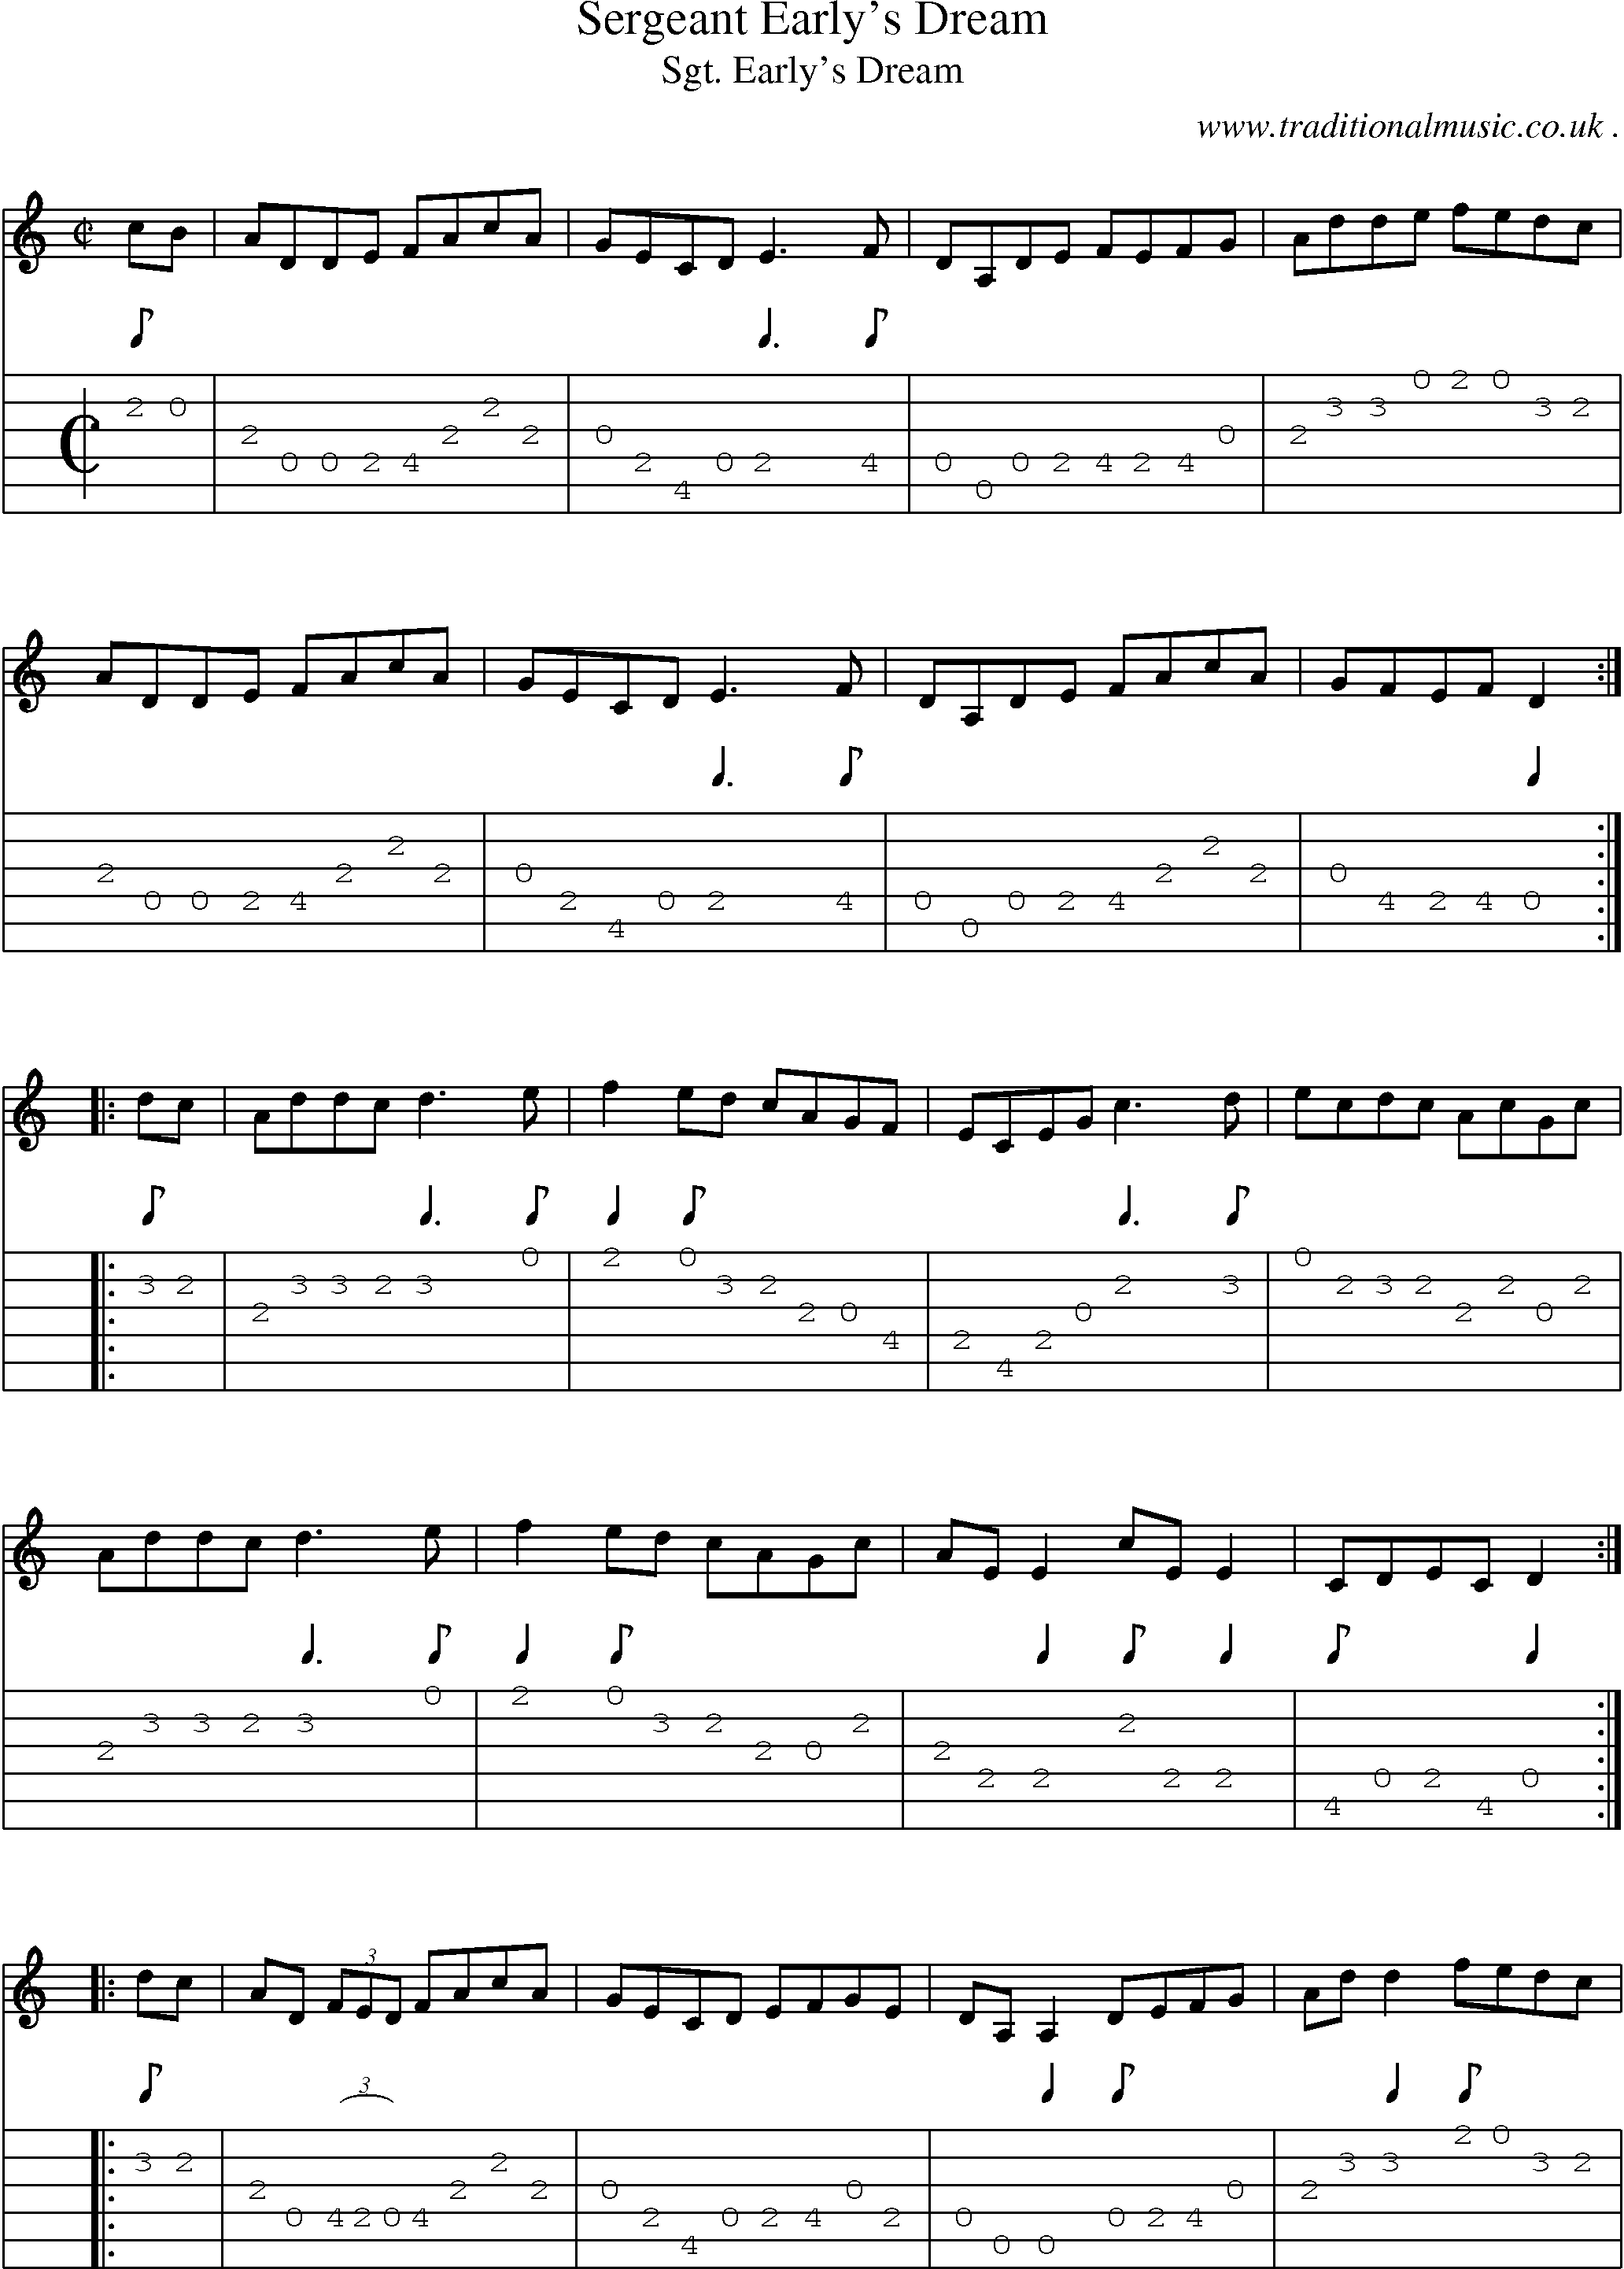 Sheet-Music and Guitar Tabs for Sergeant Earlys Dream